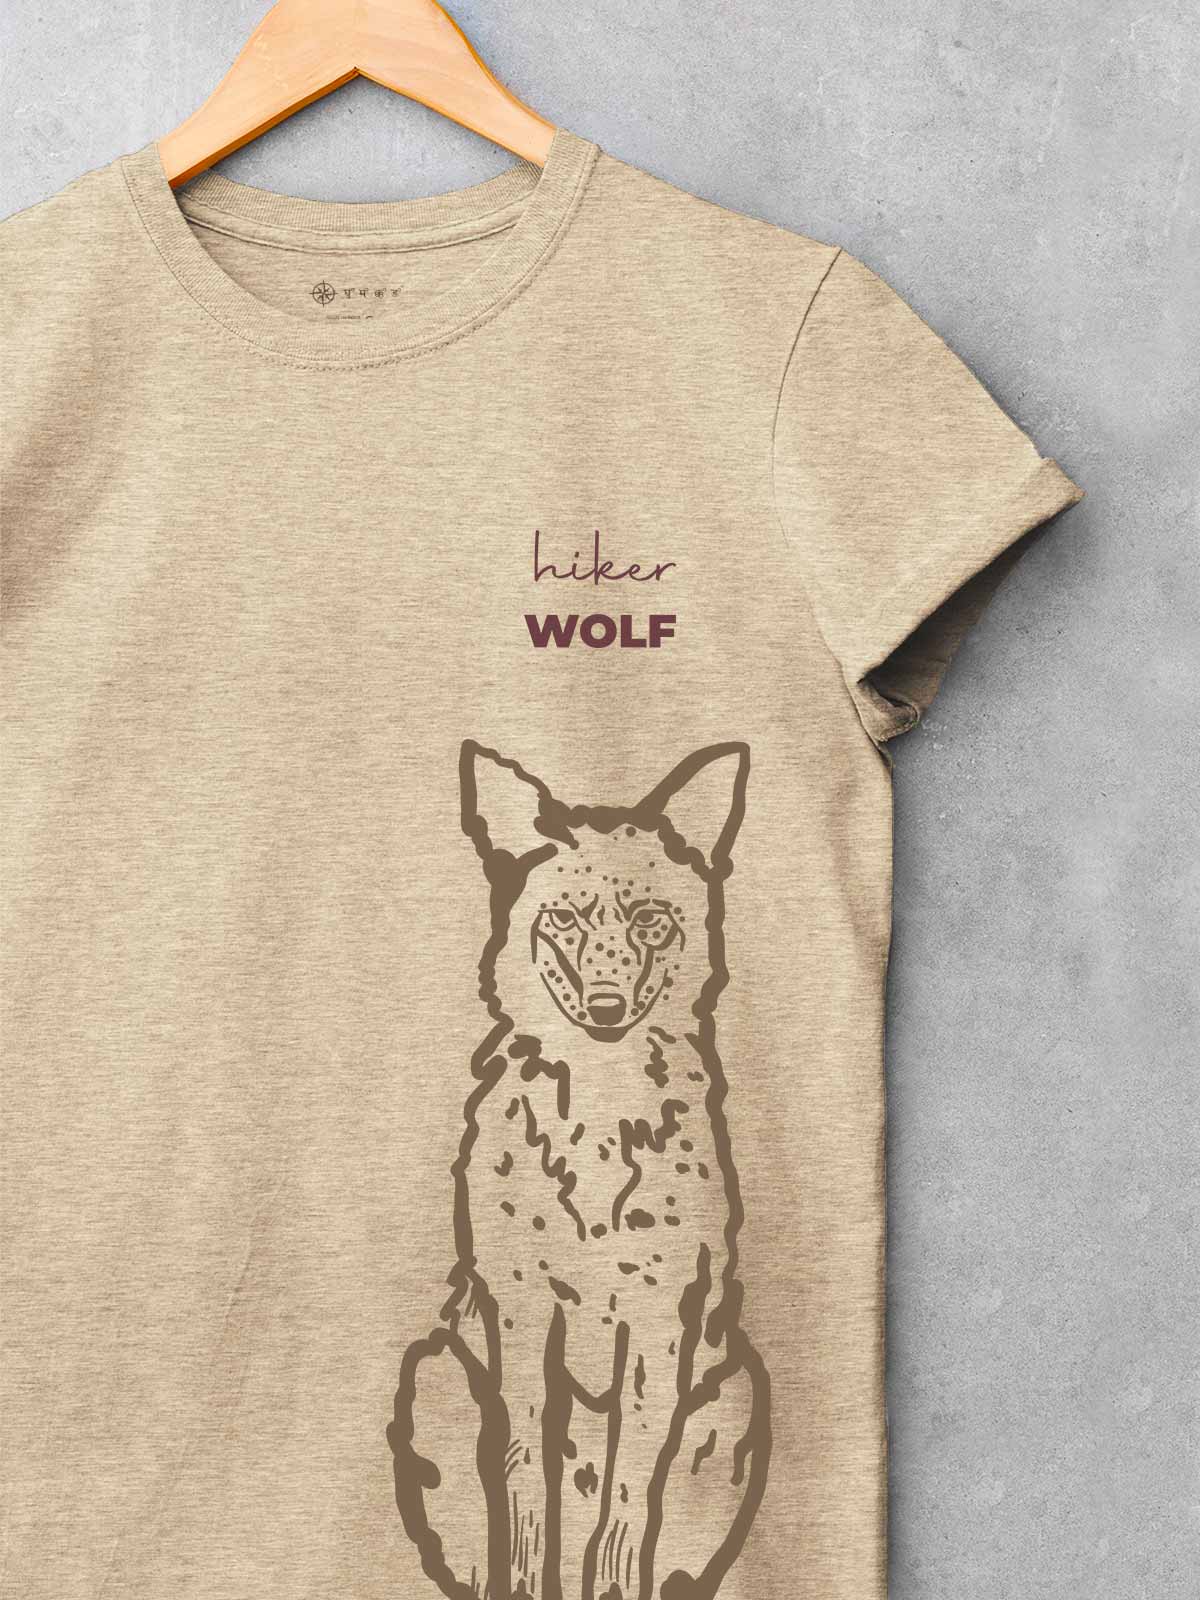 Hiker-wolf-printed-t-shirt-for-men by Ghumakkad